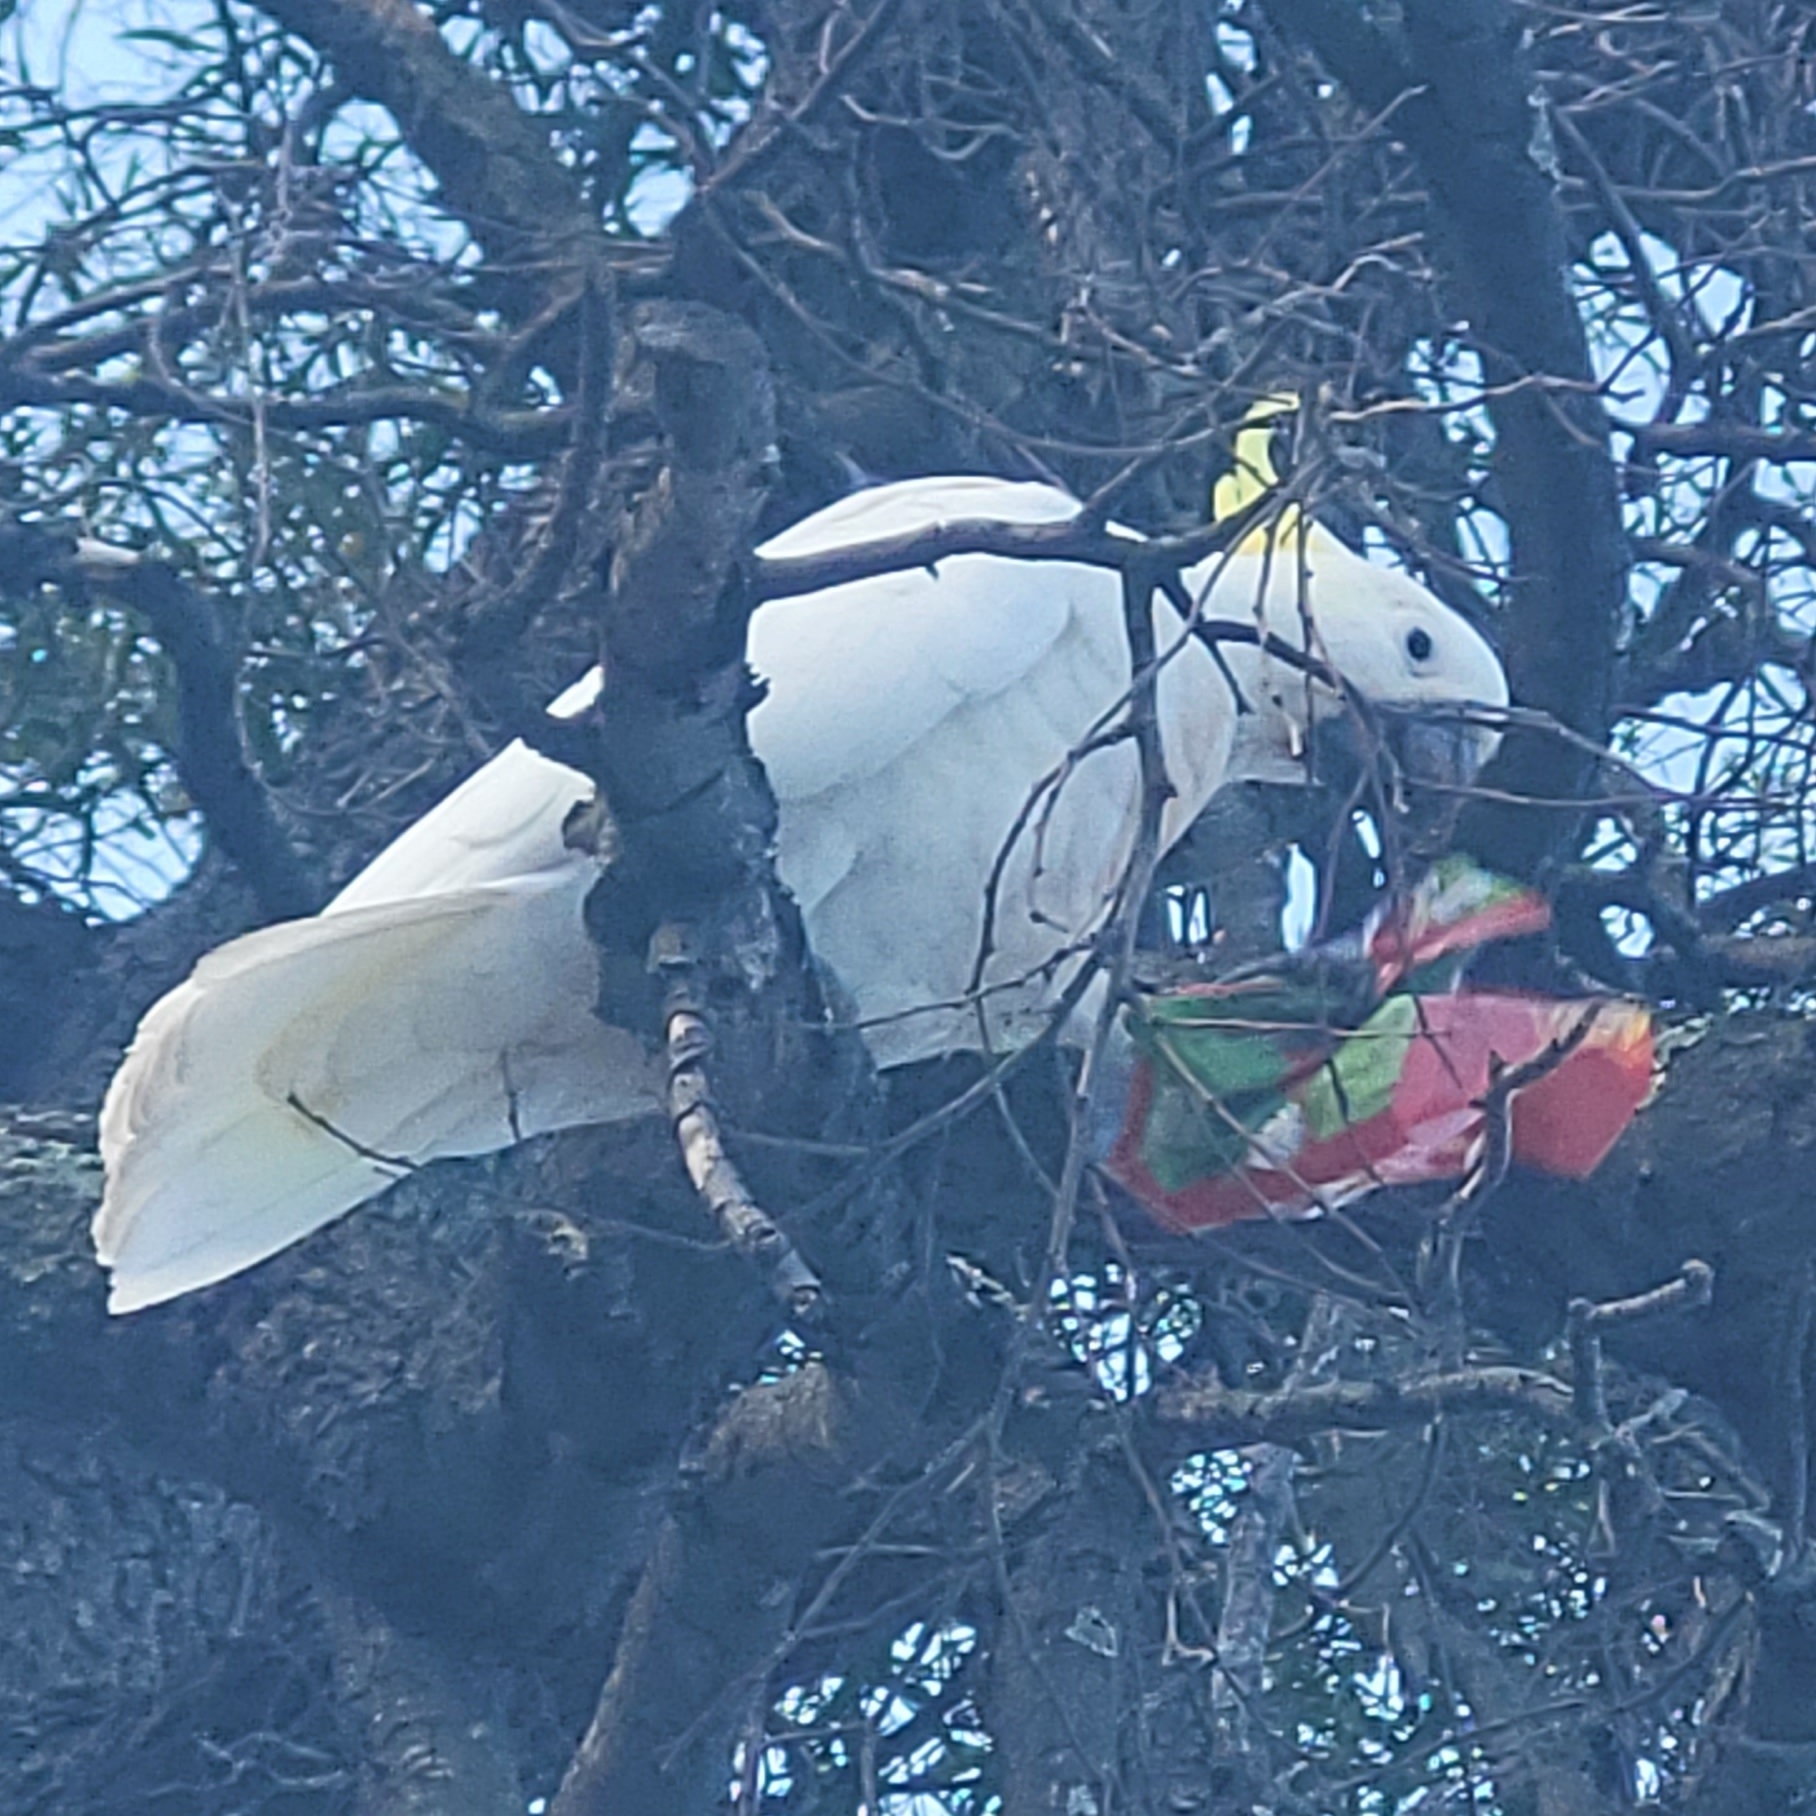 An adult Sulphur-crested Cockatoo perches on a branch with one leg, while examining an open bag of snake lollies with the other.